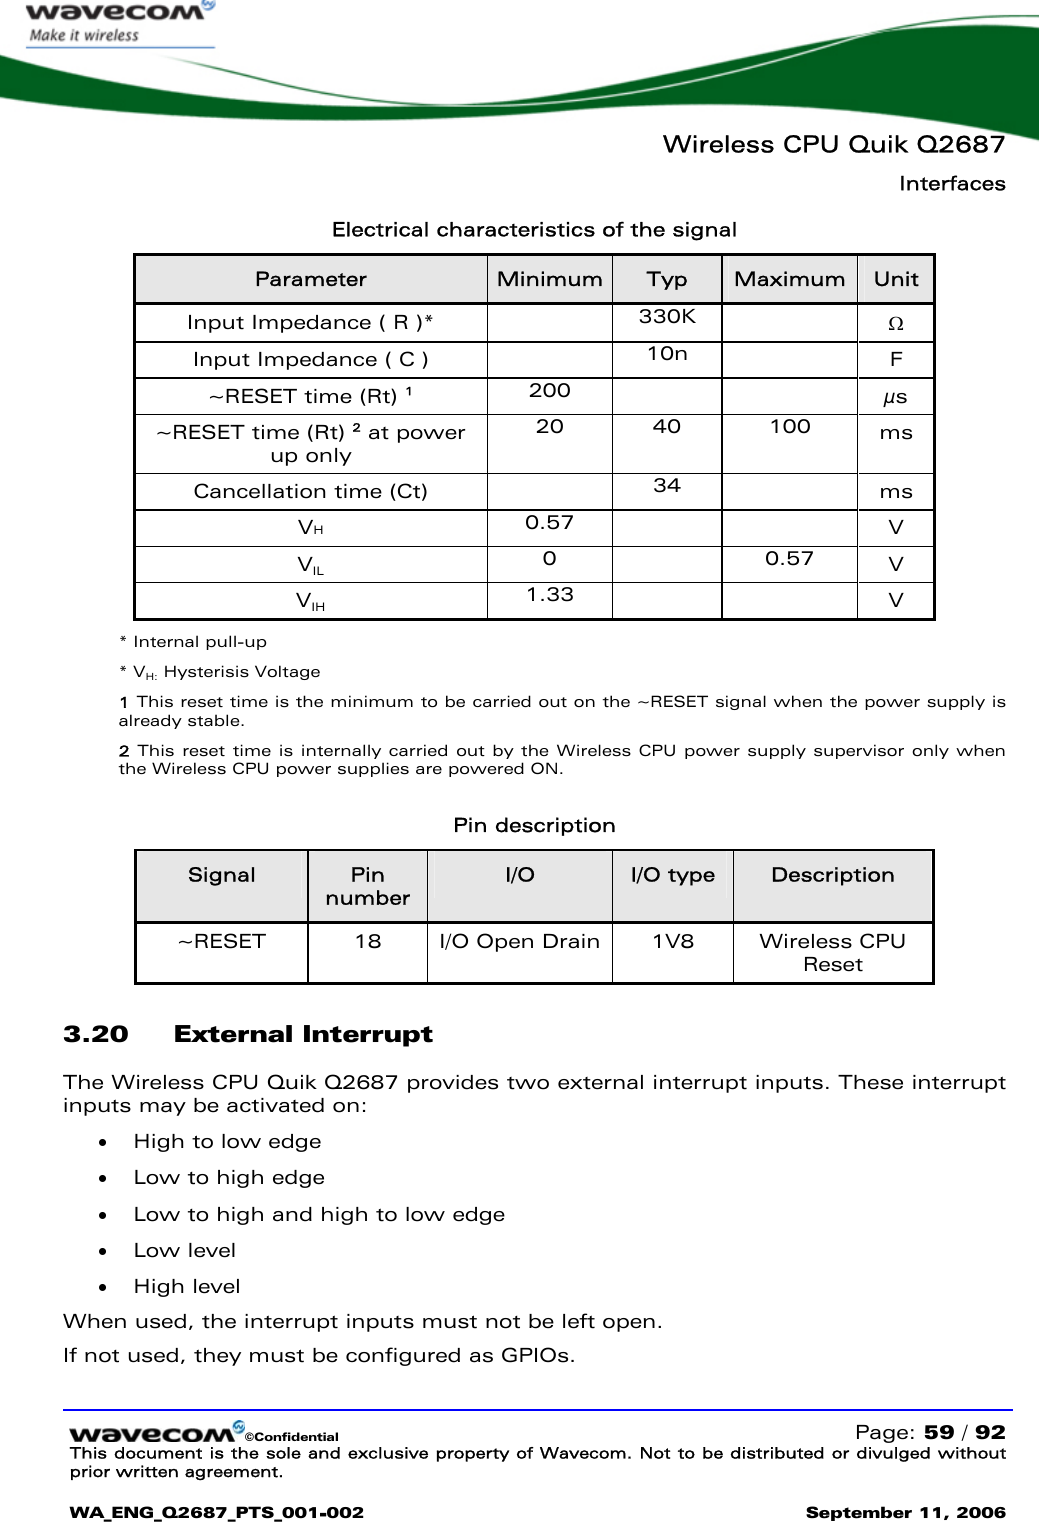   Wireless CPU Quik Q2687 Interfaces   ©Confidential   Page: 59 / 92 This document is the sole and exclusive property of Wavecom. Not to be distributed or divulged without prior written agreement.  WA_ENG_Q2687_PTS_001-002 September 11, 2006   Electrical characteristics of the signal Parameter  Minimum  Typ  Maximum  Unit Input Impedance ( R )*   330K    Ω Input Impedance ( C )   10n    F ~RESET time (Rt) 1 200    µs ~RESET time (Rt) 2 at power up only 20 40 100 ms Cancellation time (Ct)   34   ms VH 0.57     V VIL 0  0.57 V VIH 1.33     V * Internal pull-up * VH: Hysterisis Voltage 1 This reset time is the minimum to be carried out on the ~RESET signal when the power supply is already stable. 2 This reset time is internally carried out by the Wireless CPU power supply supervisor only when the Wireless CPU power supplies are powered ON.  Pin description Signal  Pin number I/O  I/O type  Description ~RESET  18  I/O Open Drain  1V8   Wireless CPU Reset 3.20 External Interrupt The Wireless CPU Quik Q2687 provides two external interrupt inputs. These interrupt inputs may be activated on: • High to low edge • Low to high edge • Low to high and high to low edge • Low level • High level When used, the interrupt inputs must not be left open. If not used, they must be configured as GPIOs.  